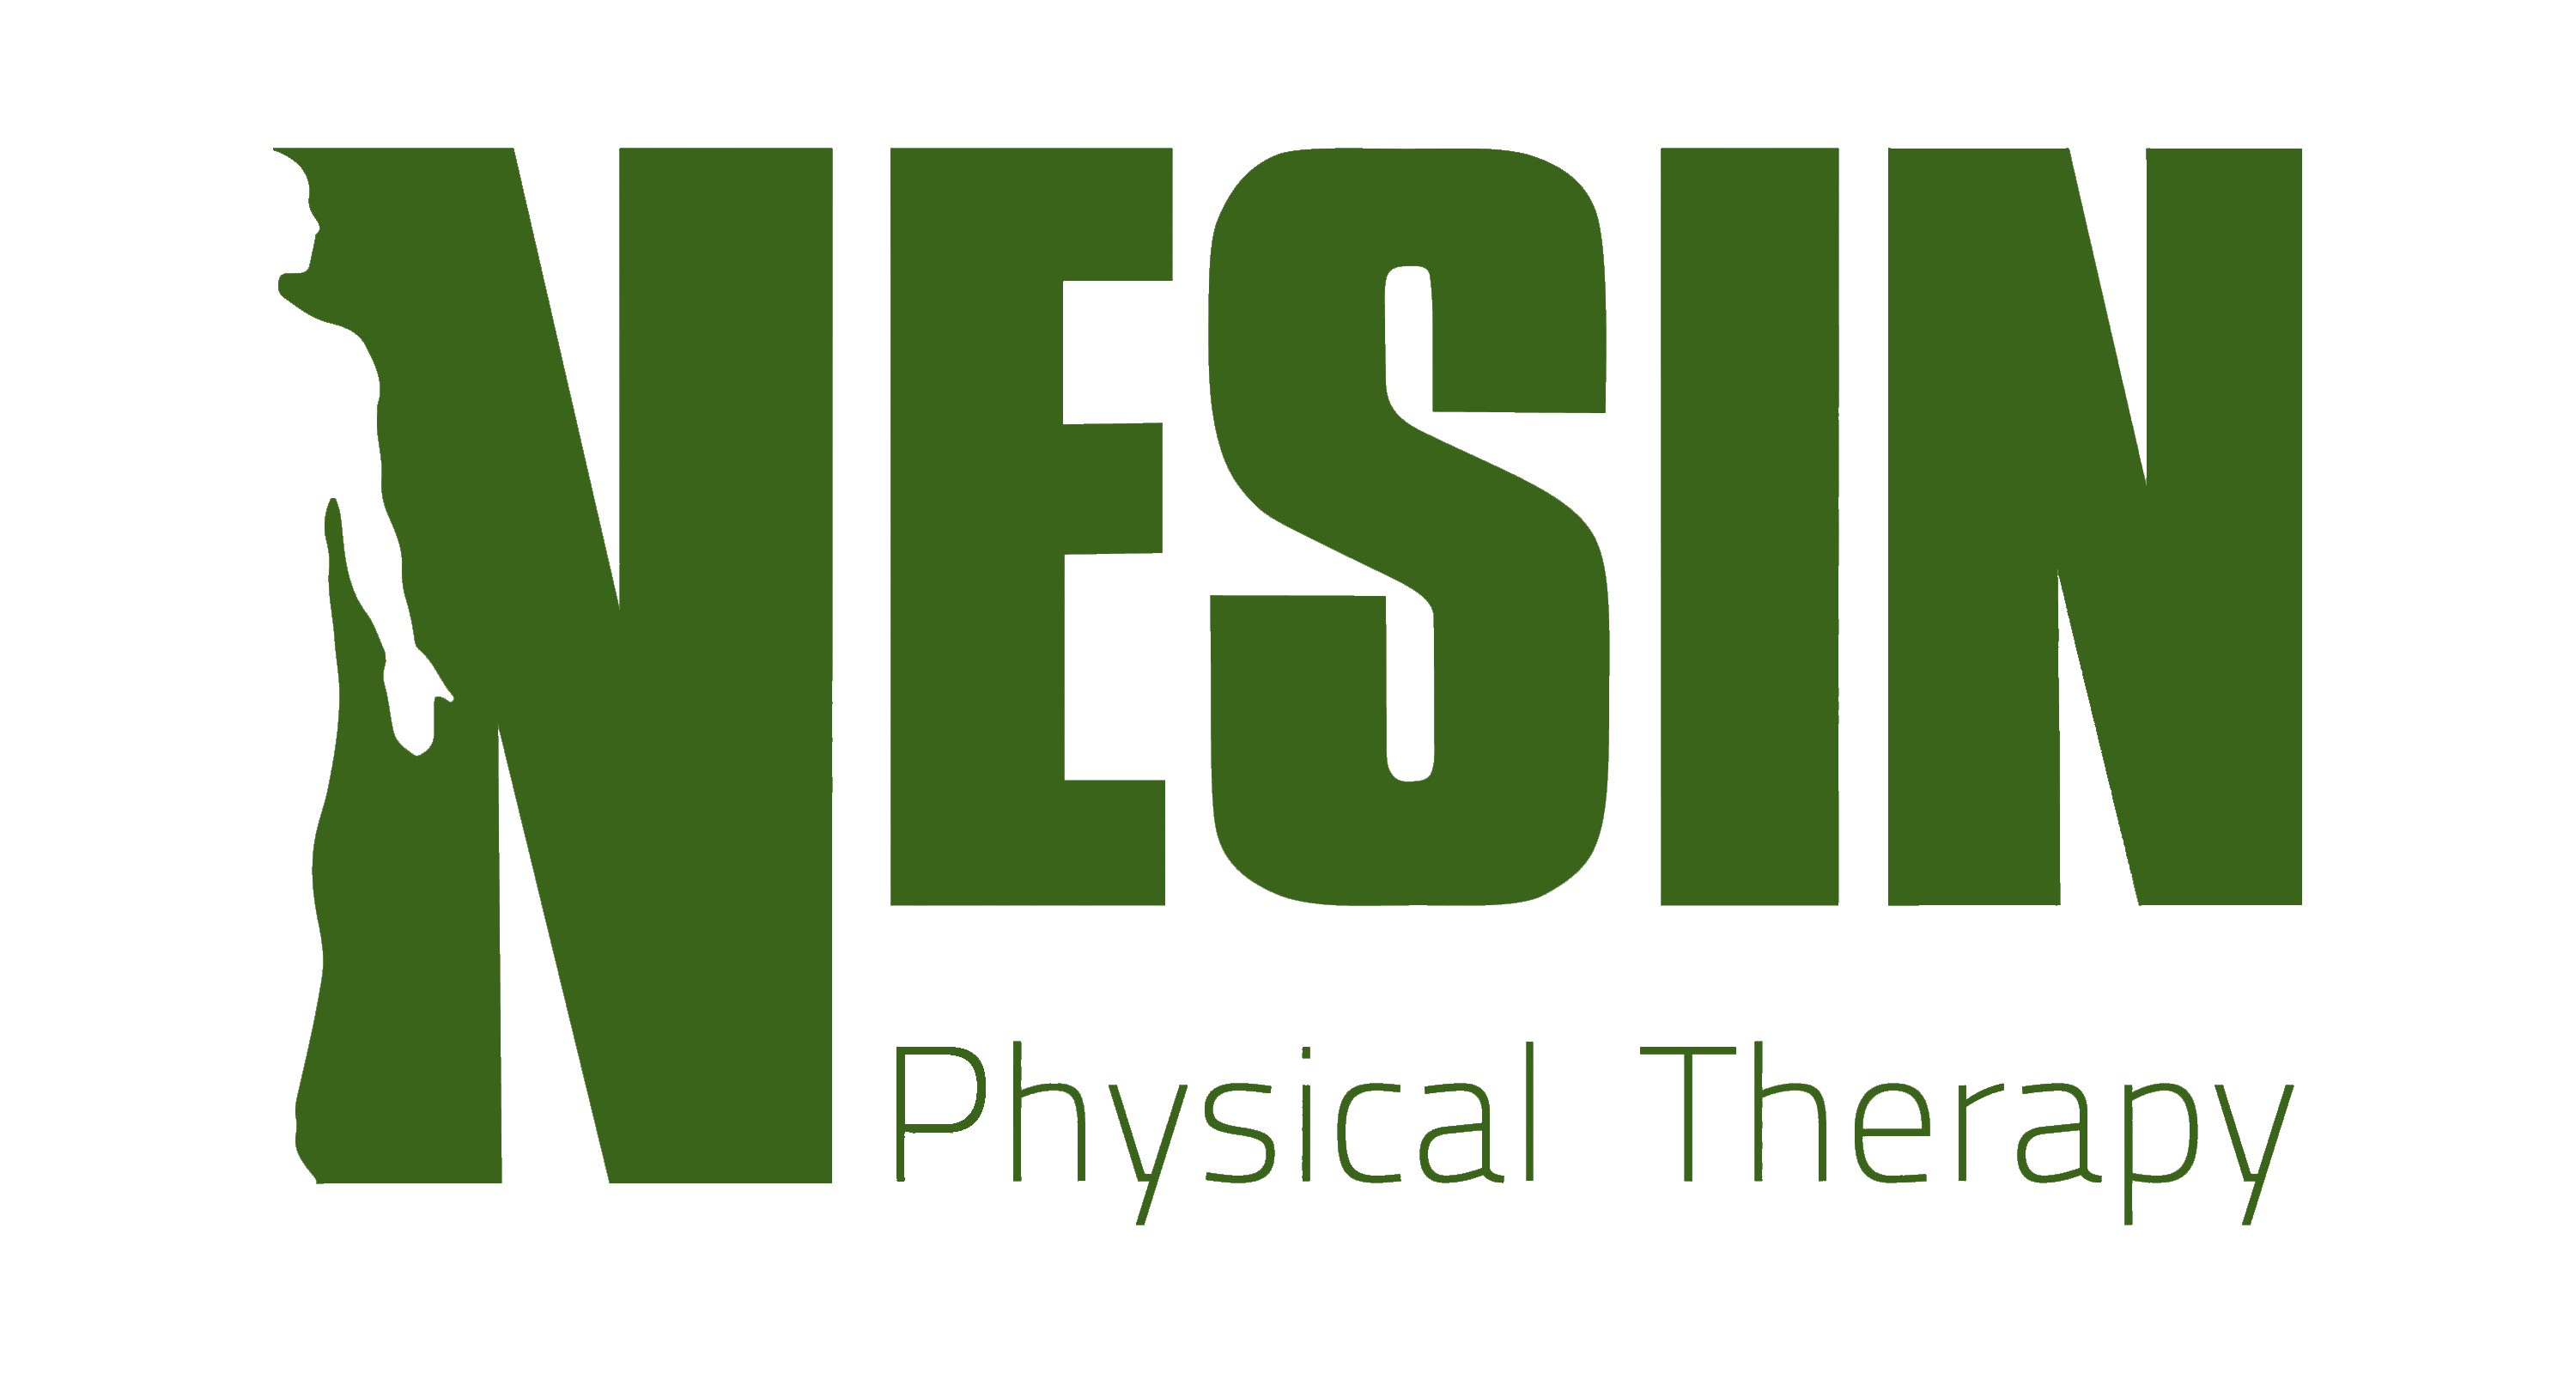 https://nesintherapy.com/wp-content/uploads/2020/04/Nesin-Physical-Therapy-Green.png